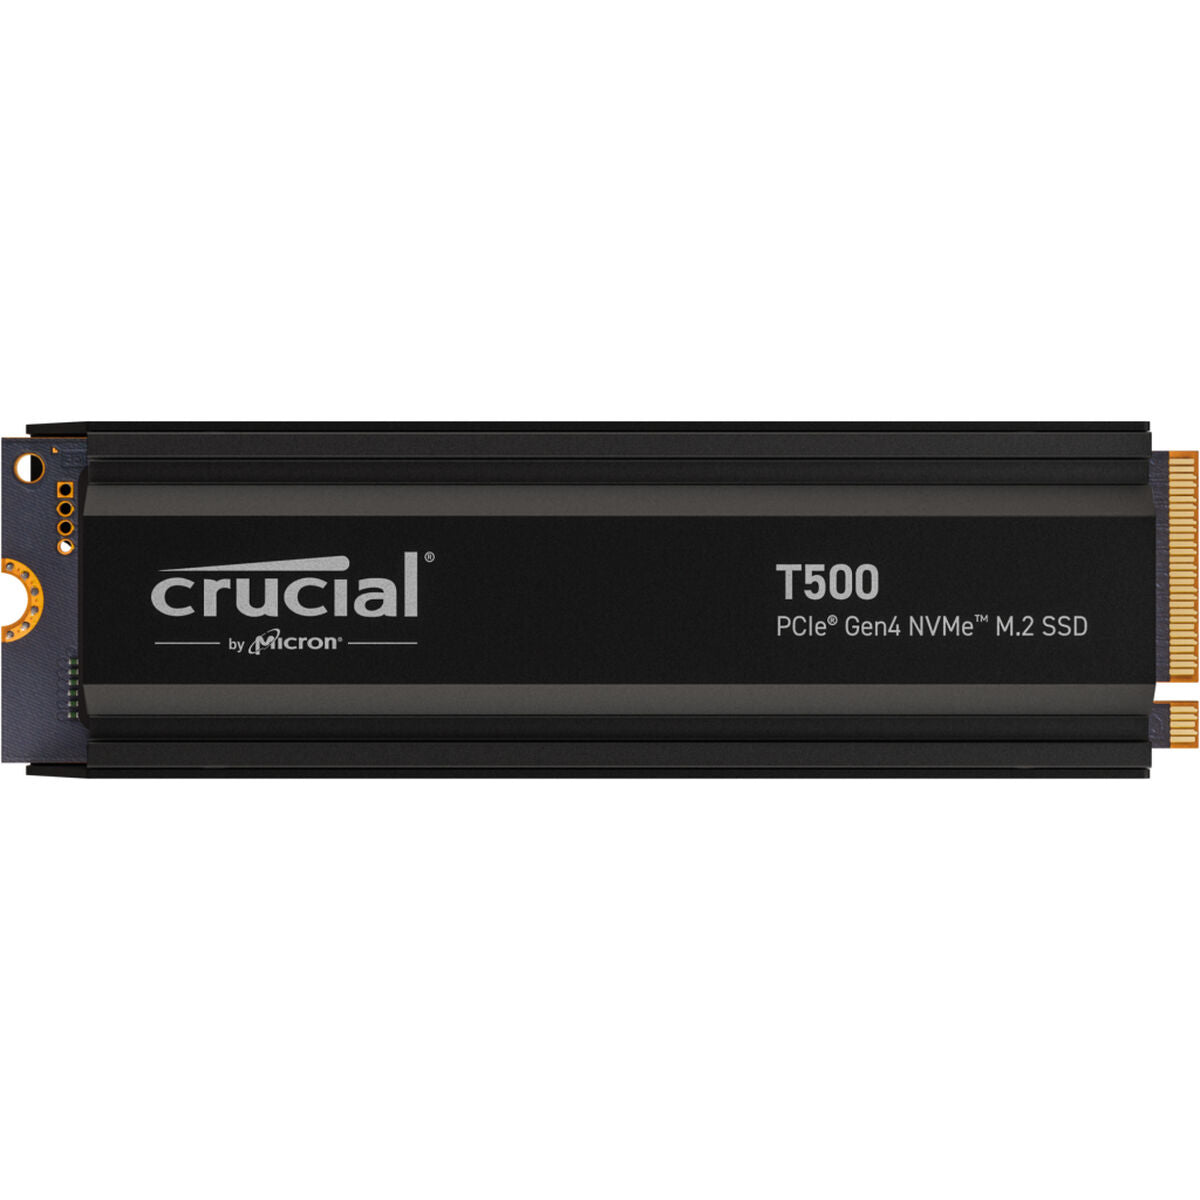 Hard Drive Crucial CT2000T500SSD5, Crucial, Computing, Data storage, hard-drive-crucial-ct2000t500ssd5, Brand_Crucial, category-reference-2609, category-reference-2803, category-reference-2806, category-reference-t-19685, category-reference-t-19909, category-reference-t-21357, category-reference-t-25639, computers / components, Condition_NEW, Price_200 - 300, Teleworking, RiotNook